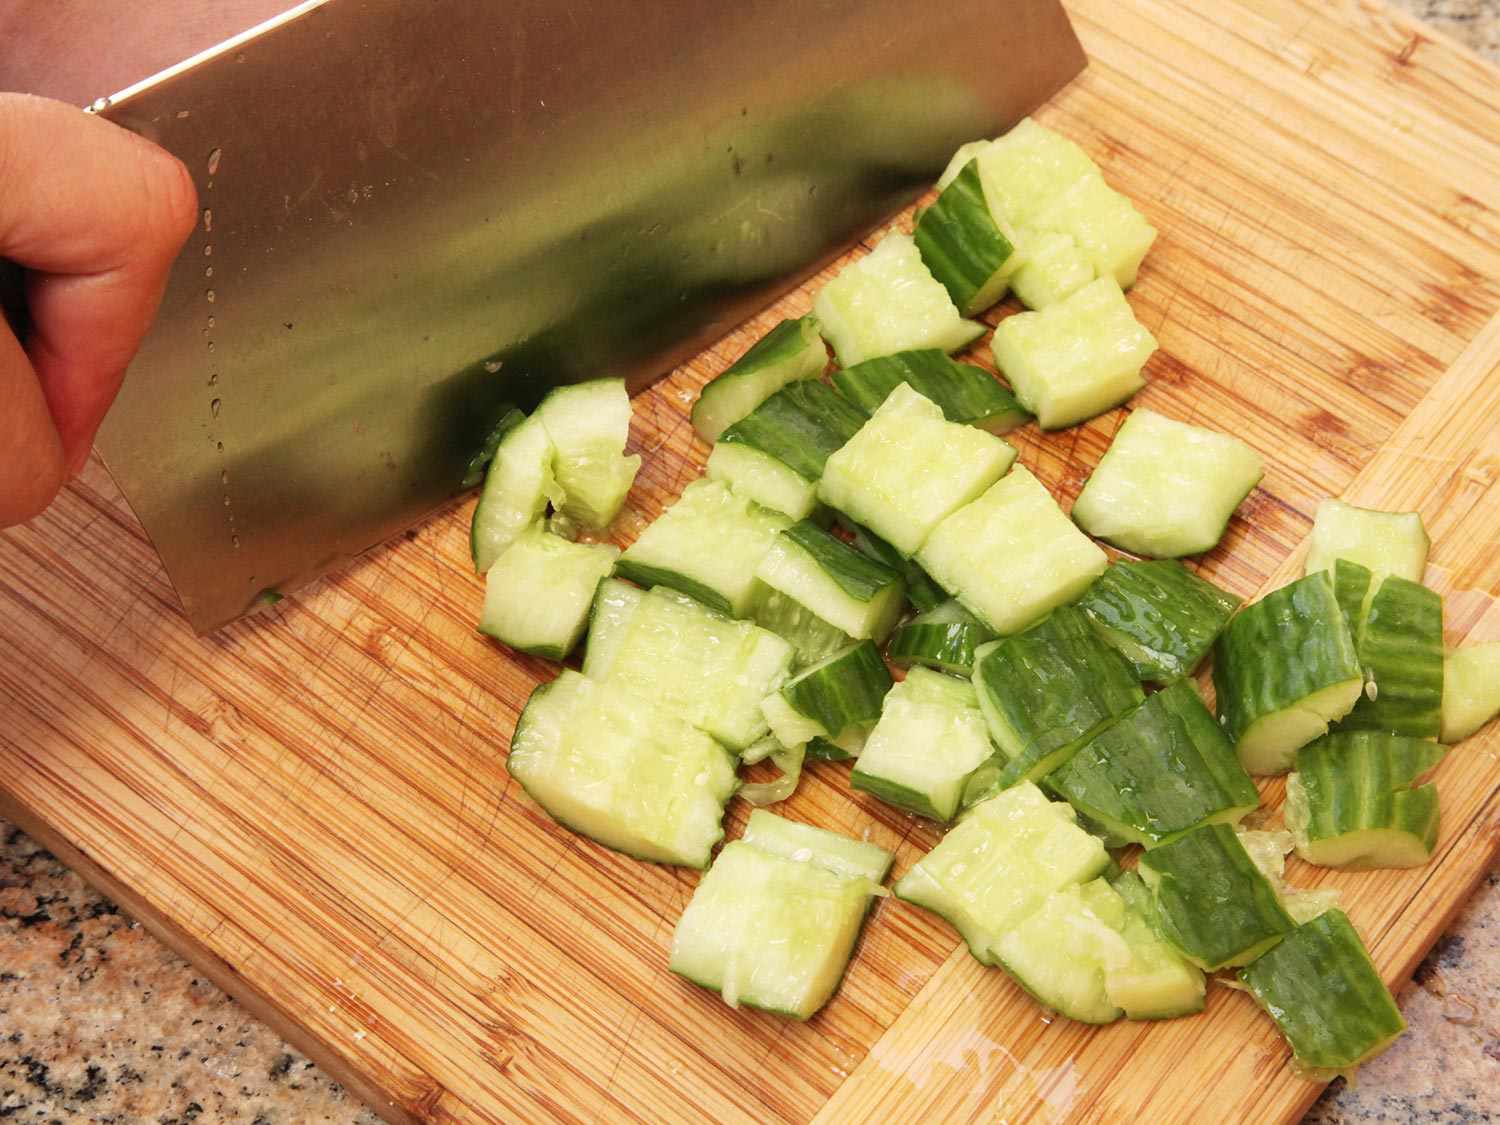 Using a cleaver to cross-cut smashed cucumbers.